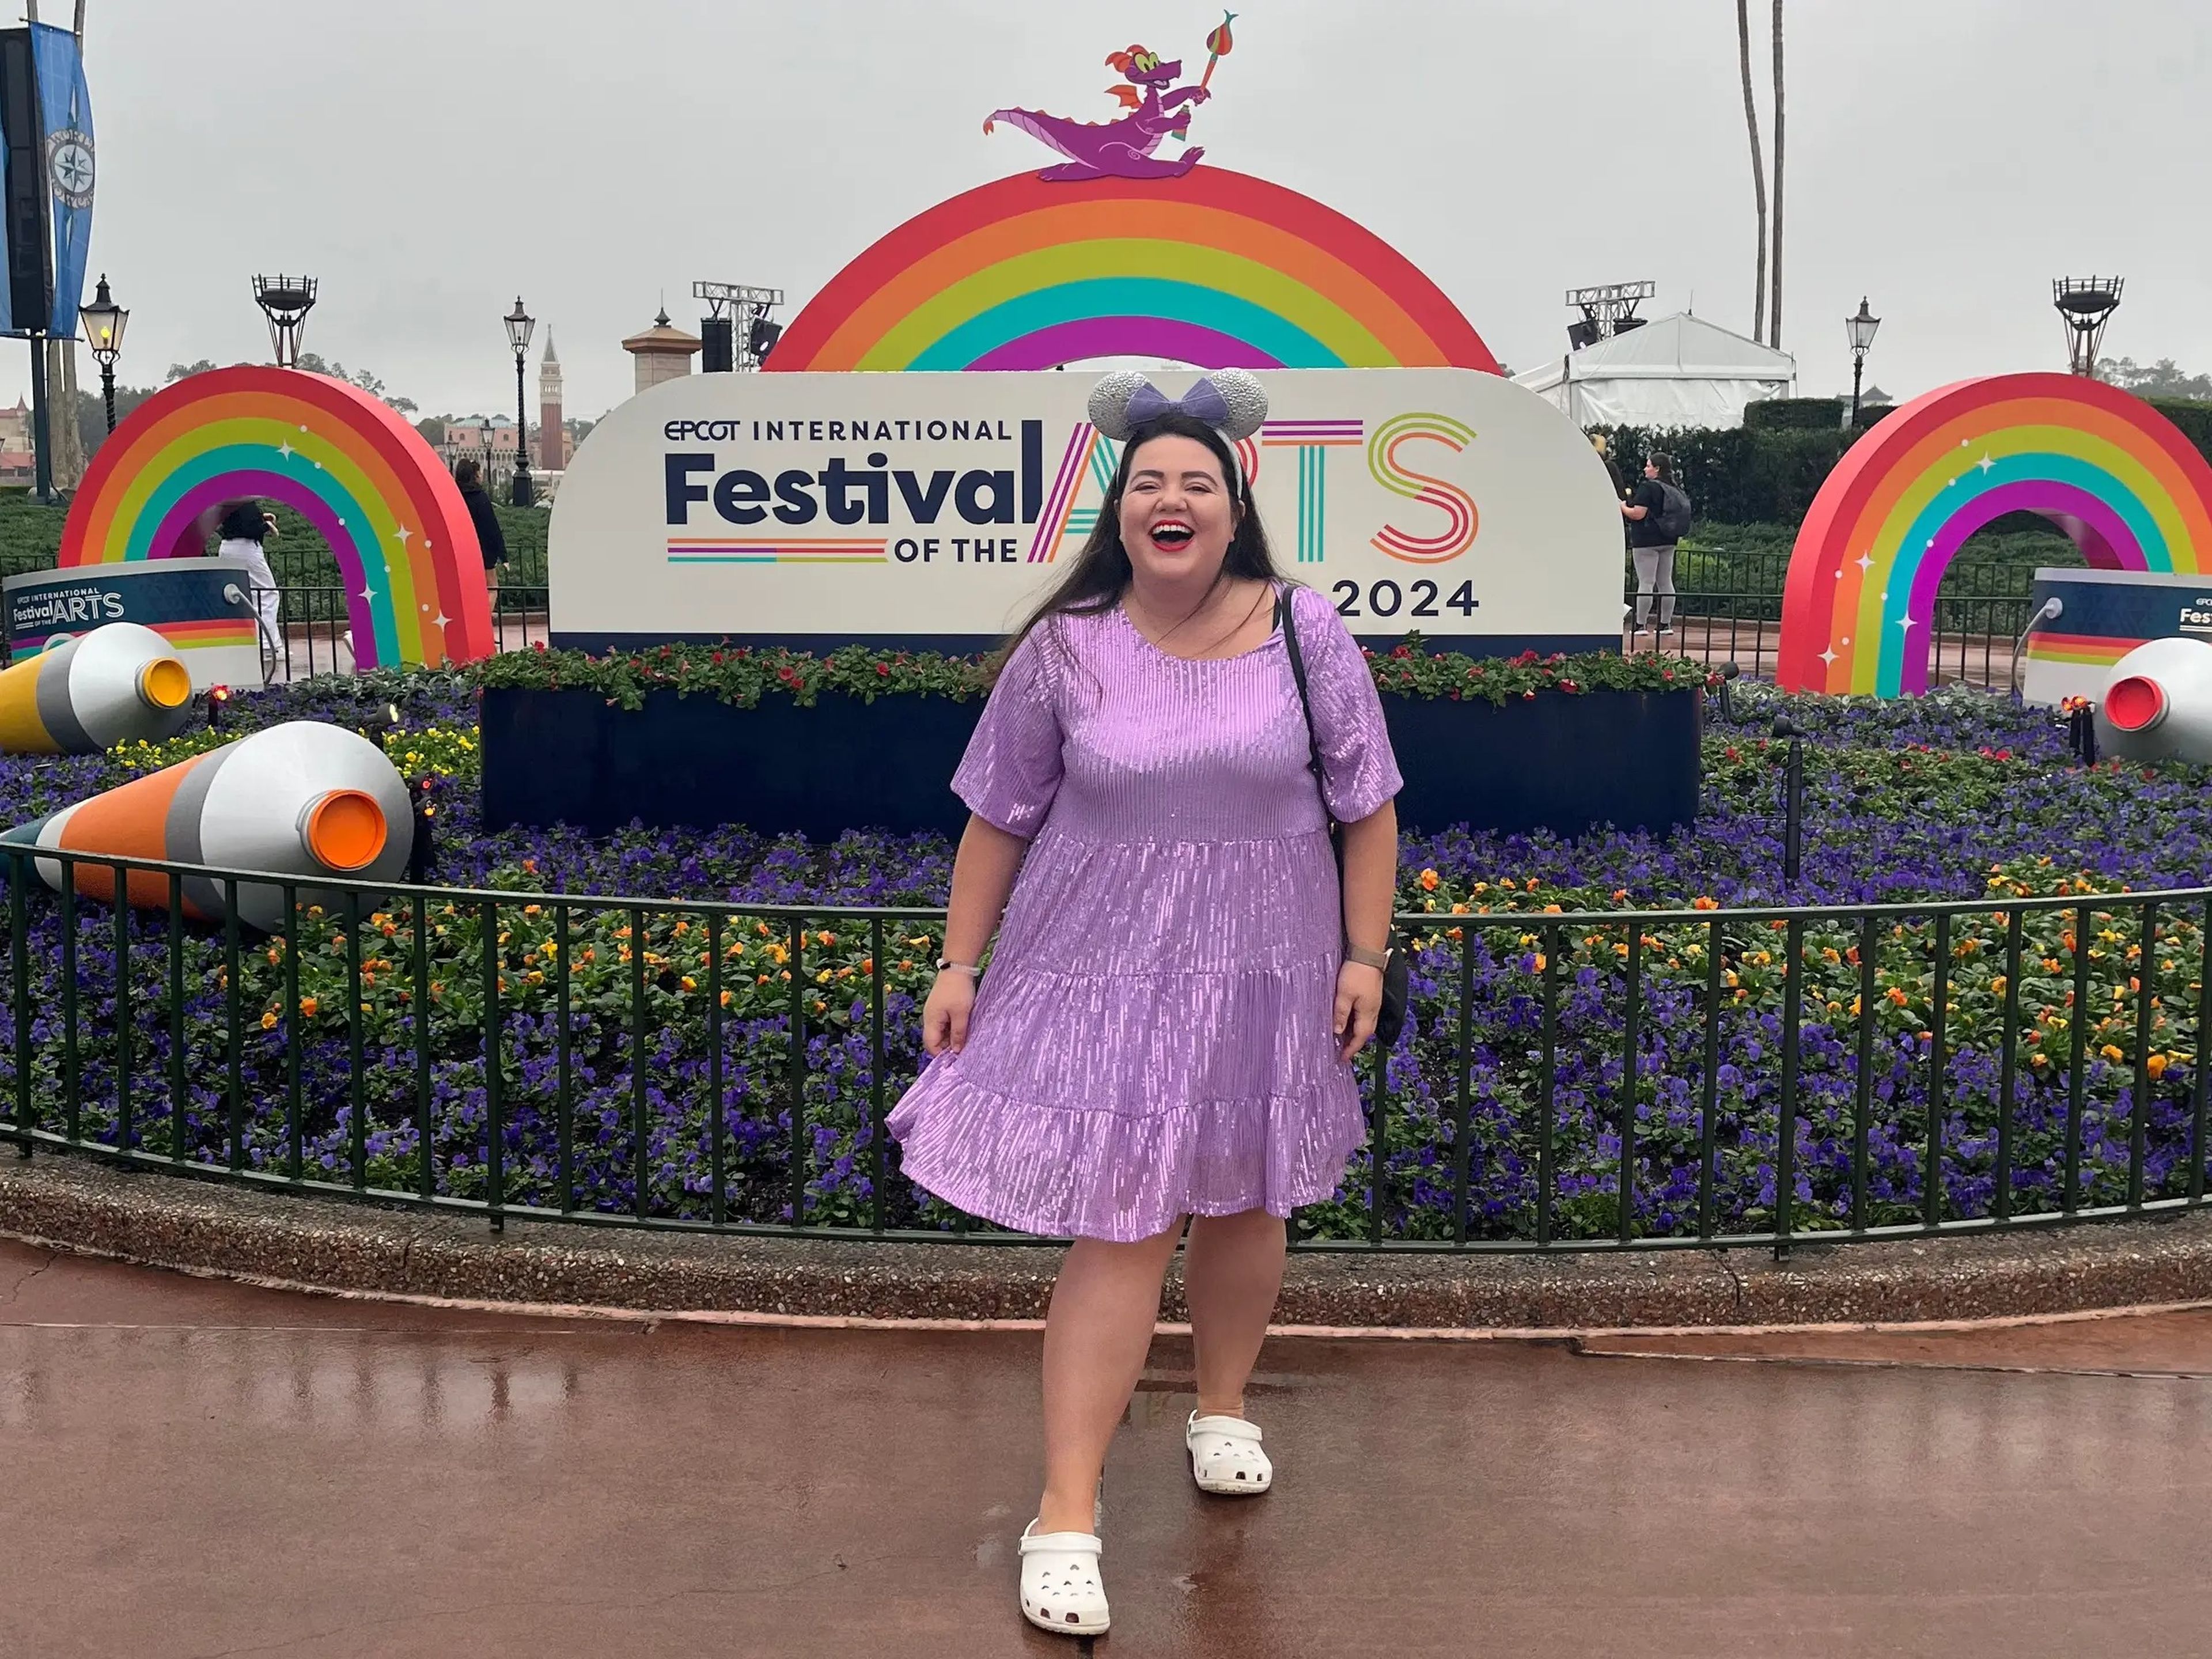 megan dubois posing in front of the rainbow festival of th arts sign at epcot in disney world